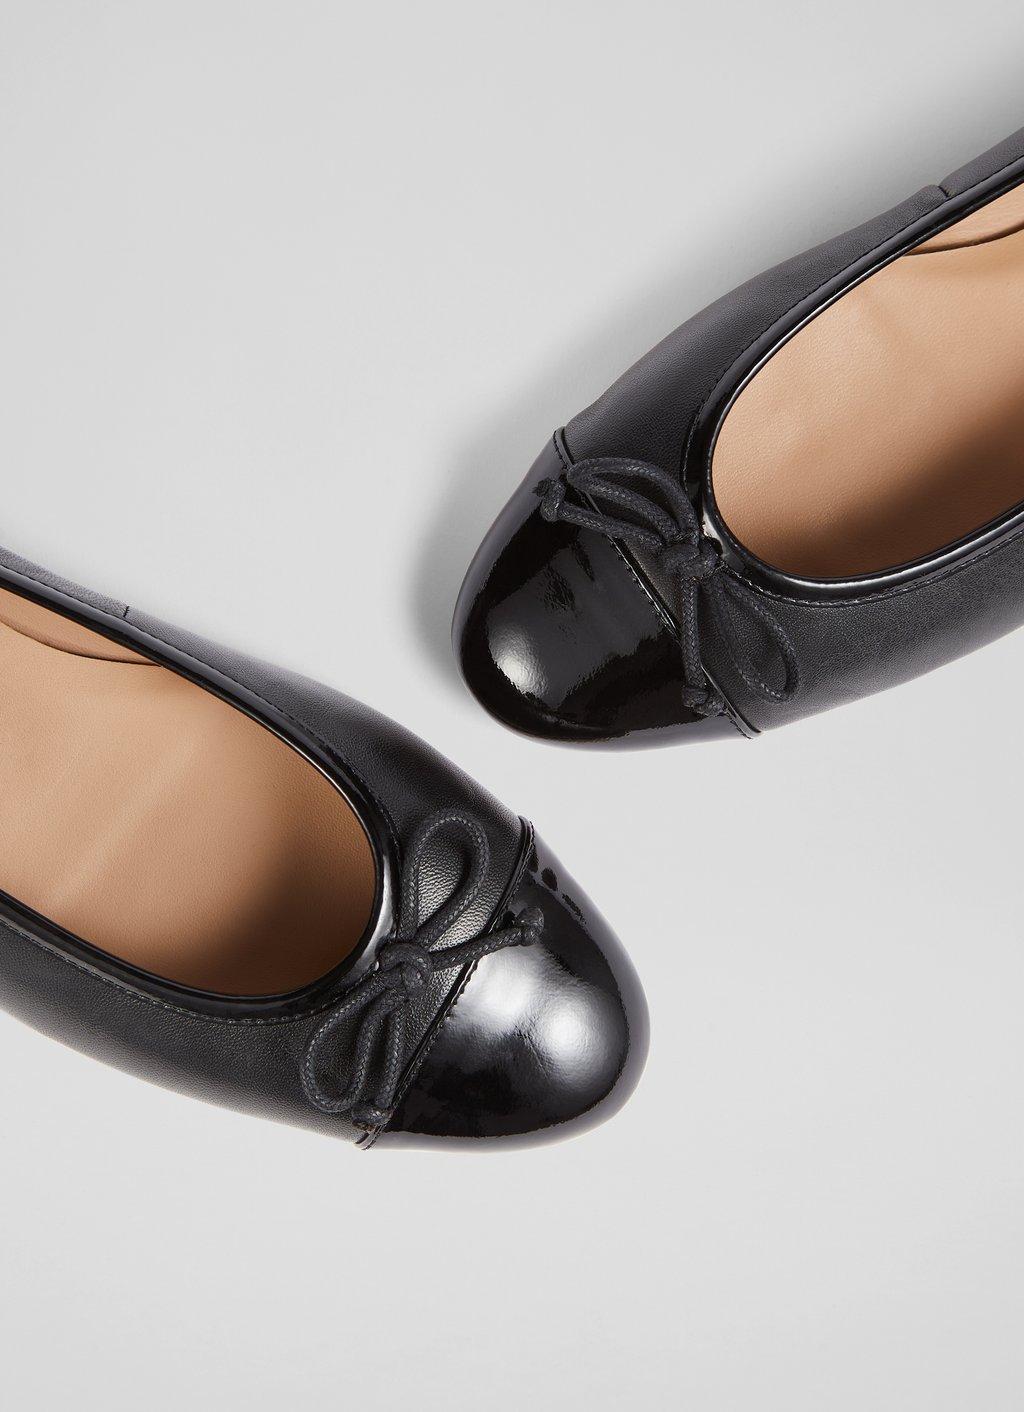 Kara Black Leather and Toe Cap Ballet Flats | Shoes | Collections | L.K.Bennett, London